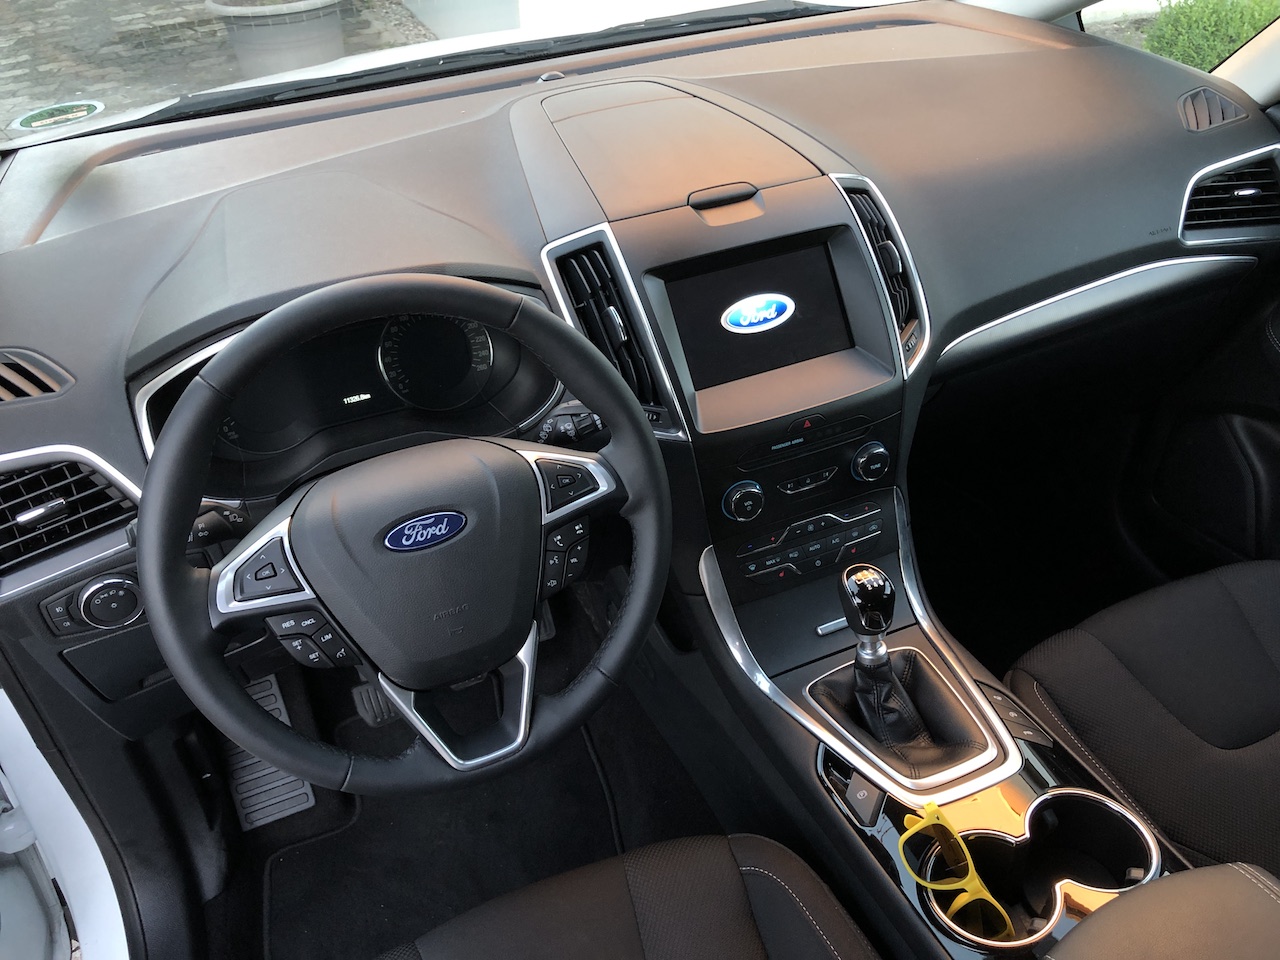 Ford S-Max_001.JPG